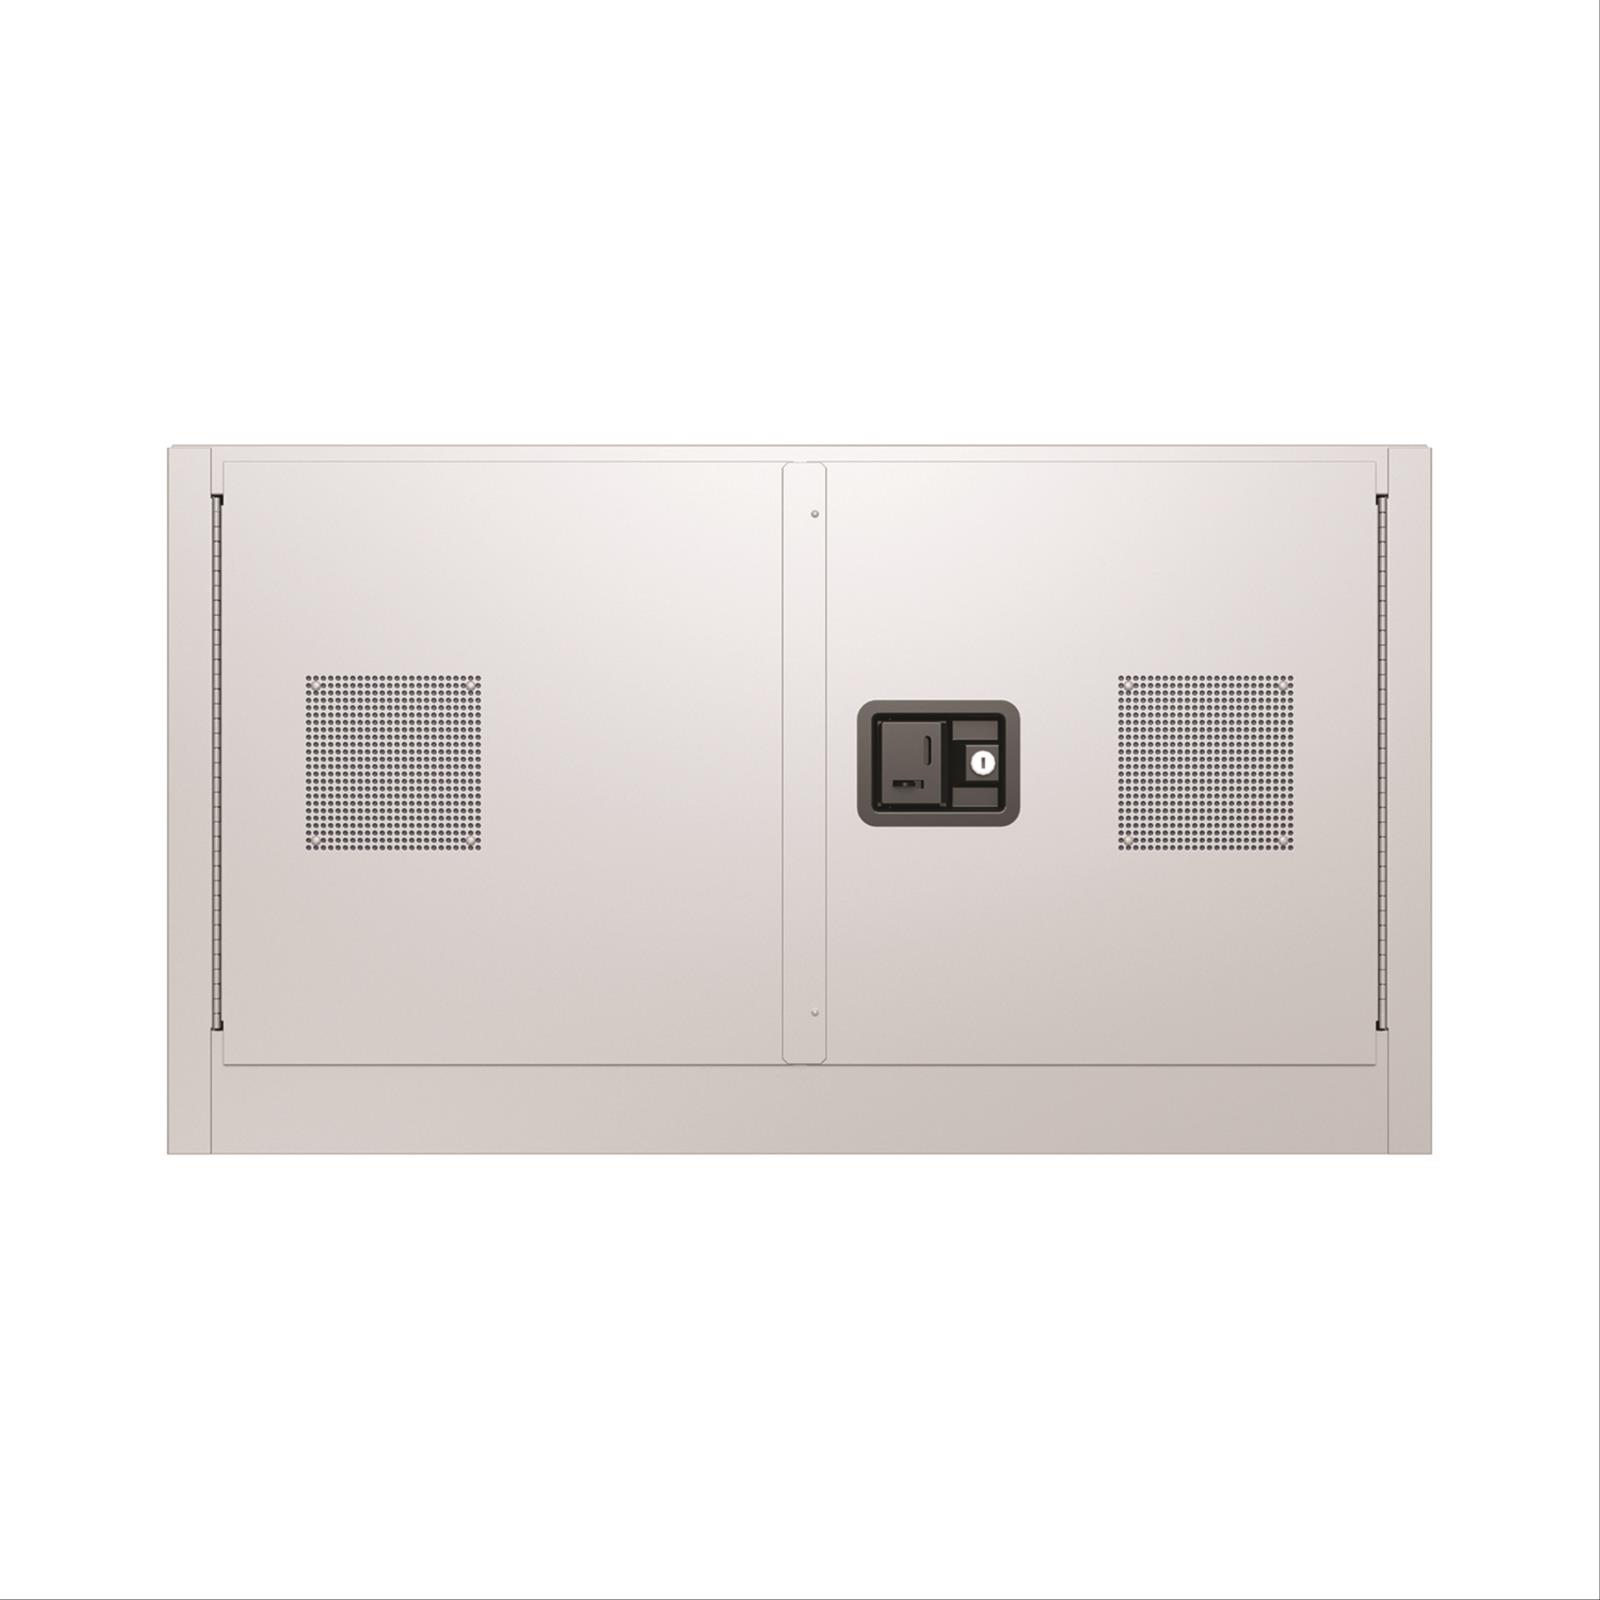 Lithium-Ion Battery Charging Safety Cabinet, Manual Close